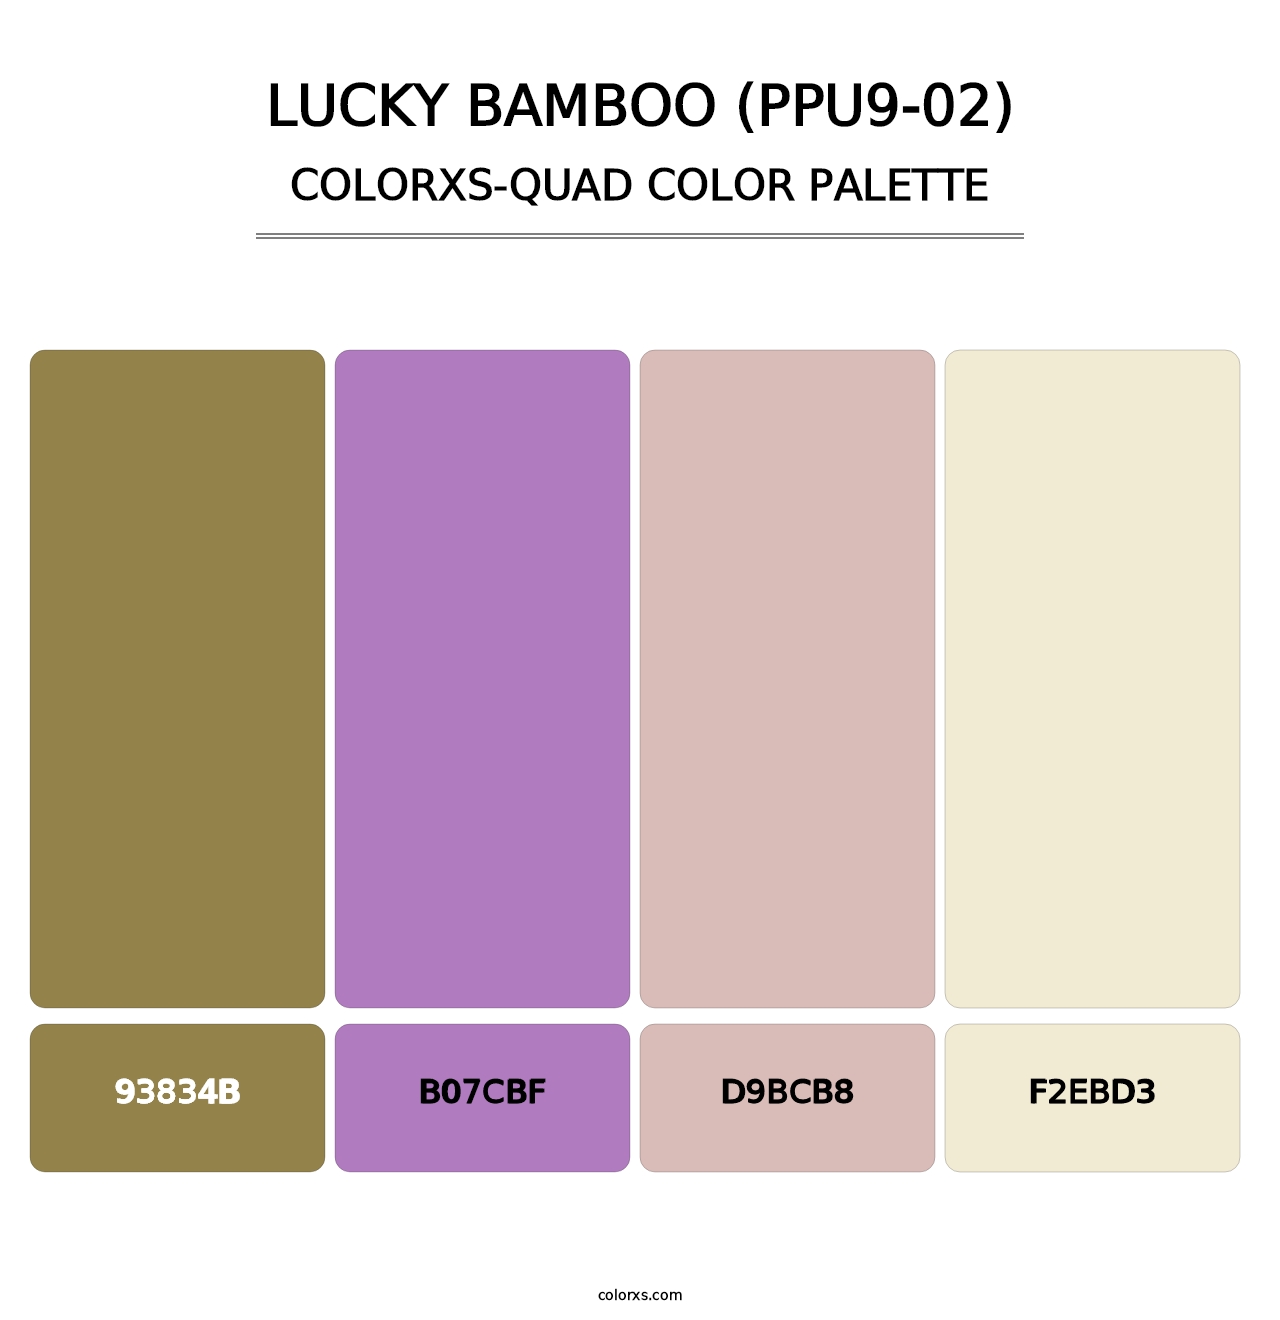 Lucky Bamboo (PPU9-02) - Colorxs Quad Palette